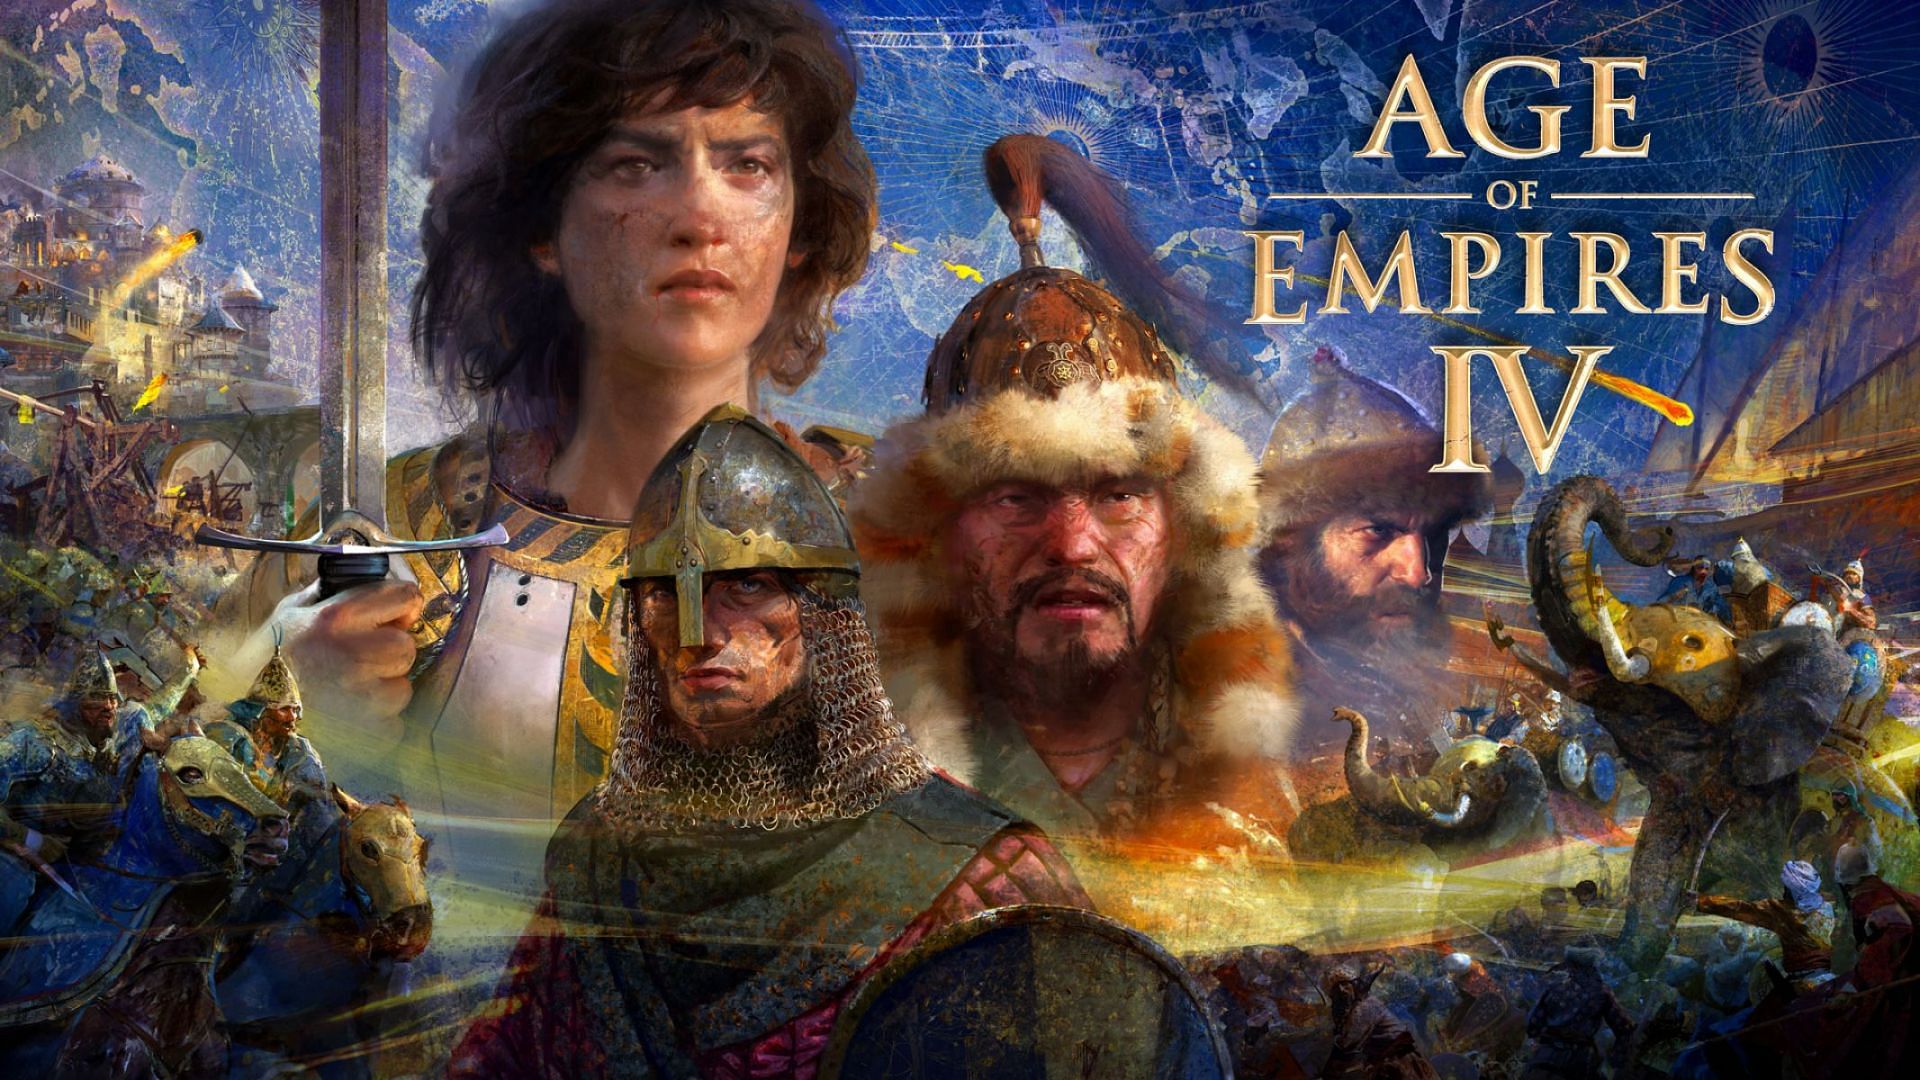 Old school RTS enters a new golden era (Image via Age of Empires IV/Relic Entertainment)